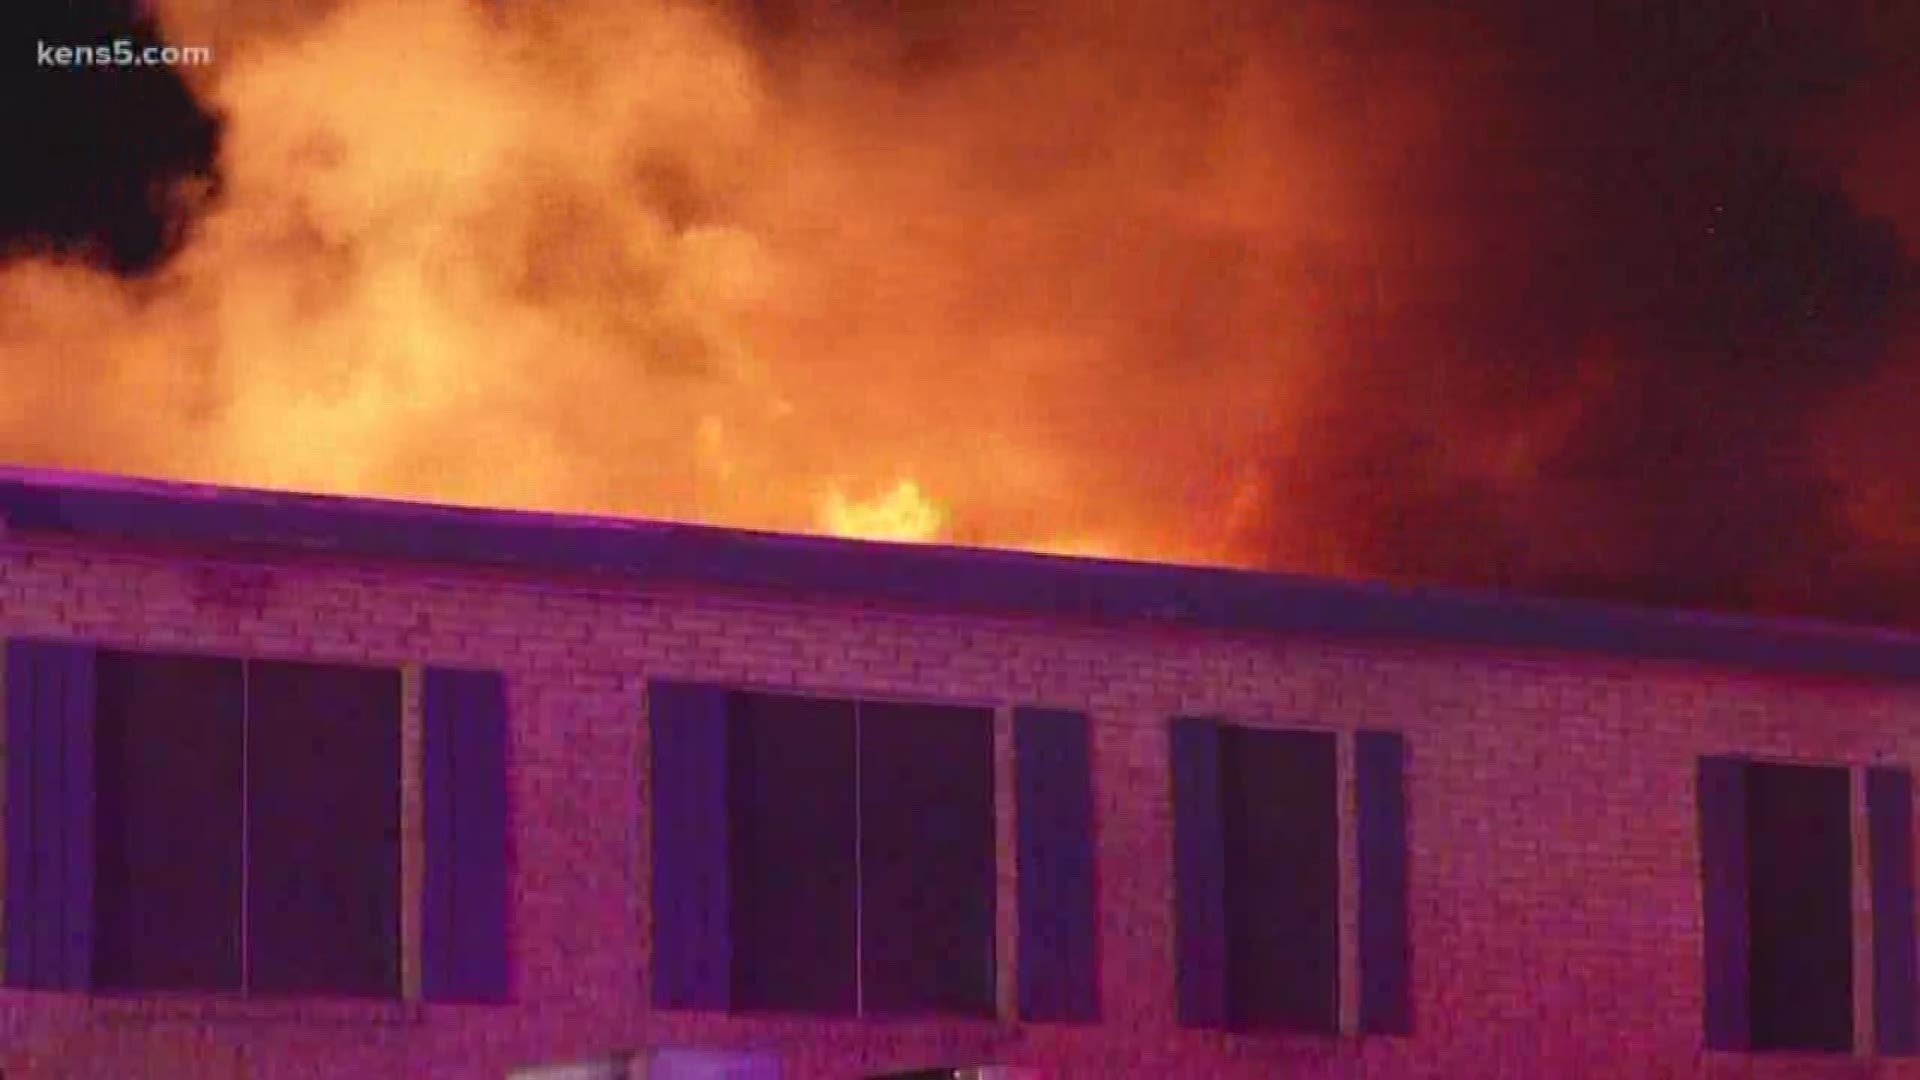 Several residents have been displaced as the result of a fire that broke out Sunday night around 9:30 p.m. at the Willow Run Apartments on the city's north side.